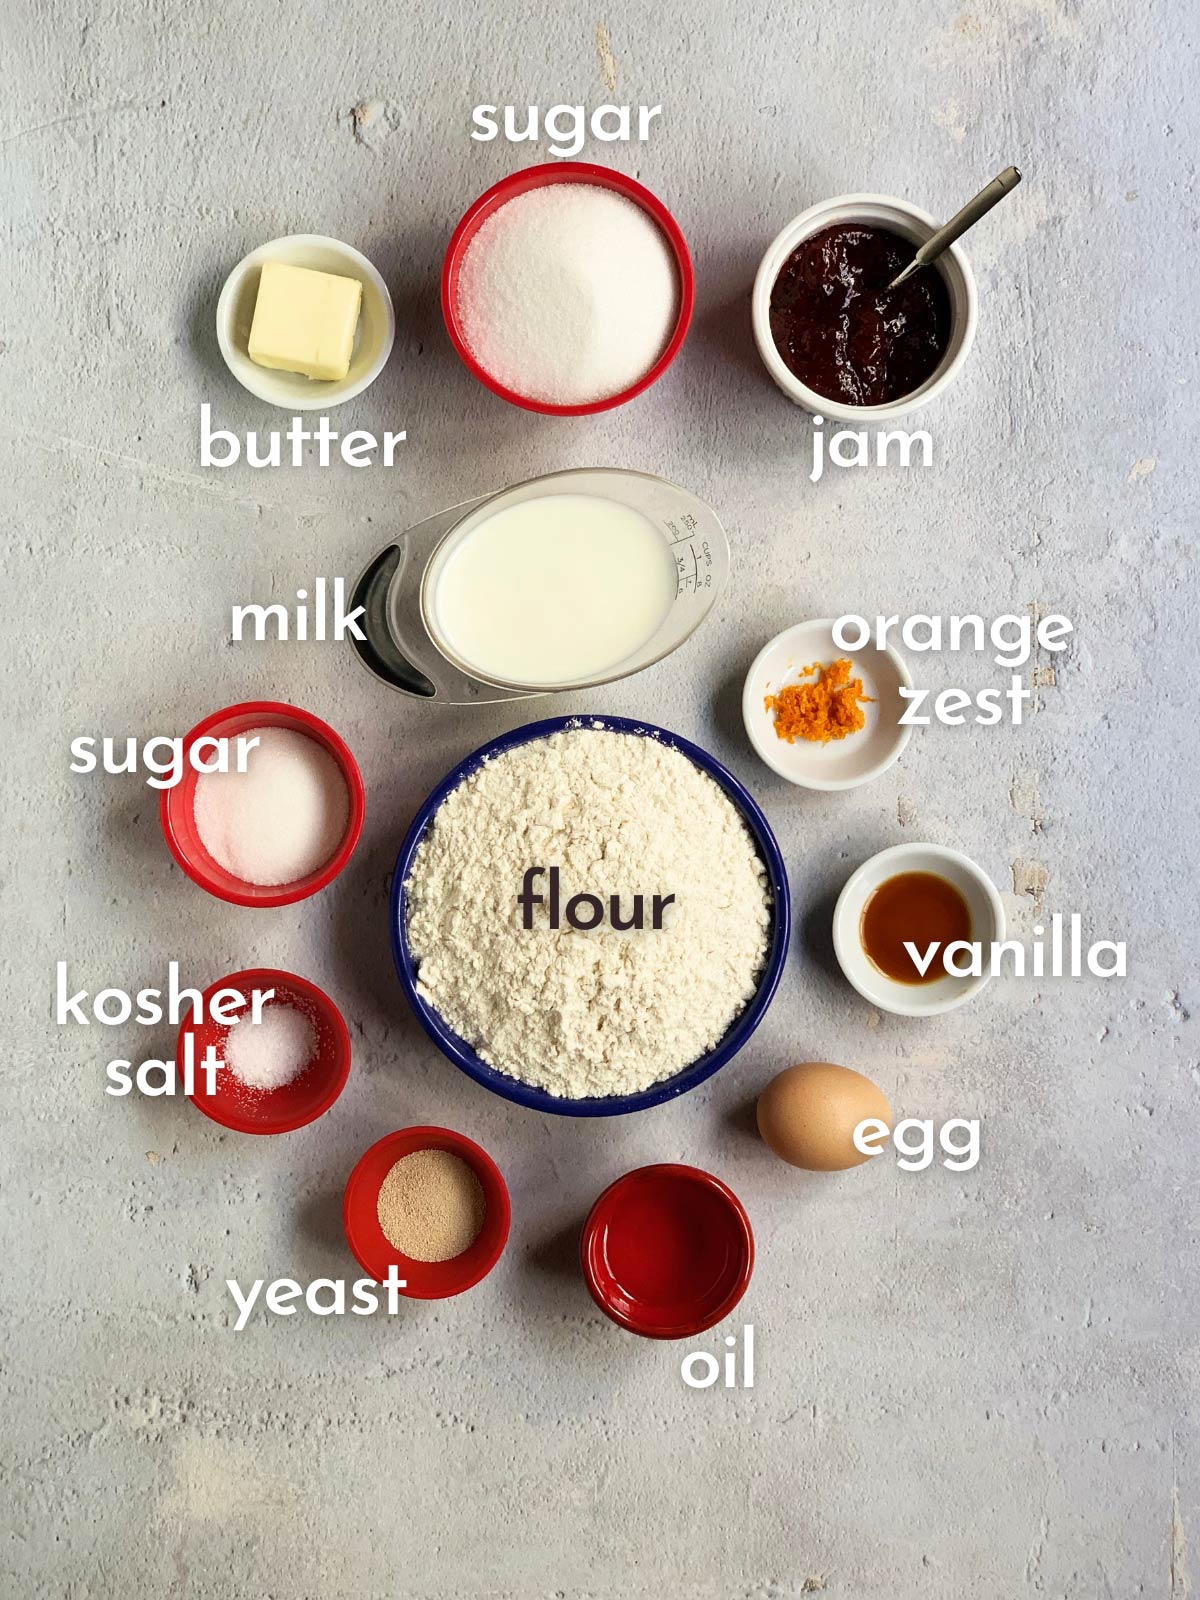 Ingredient shot with everything you need to make jelly filled donuts labeled with their names.